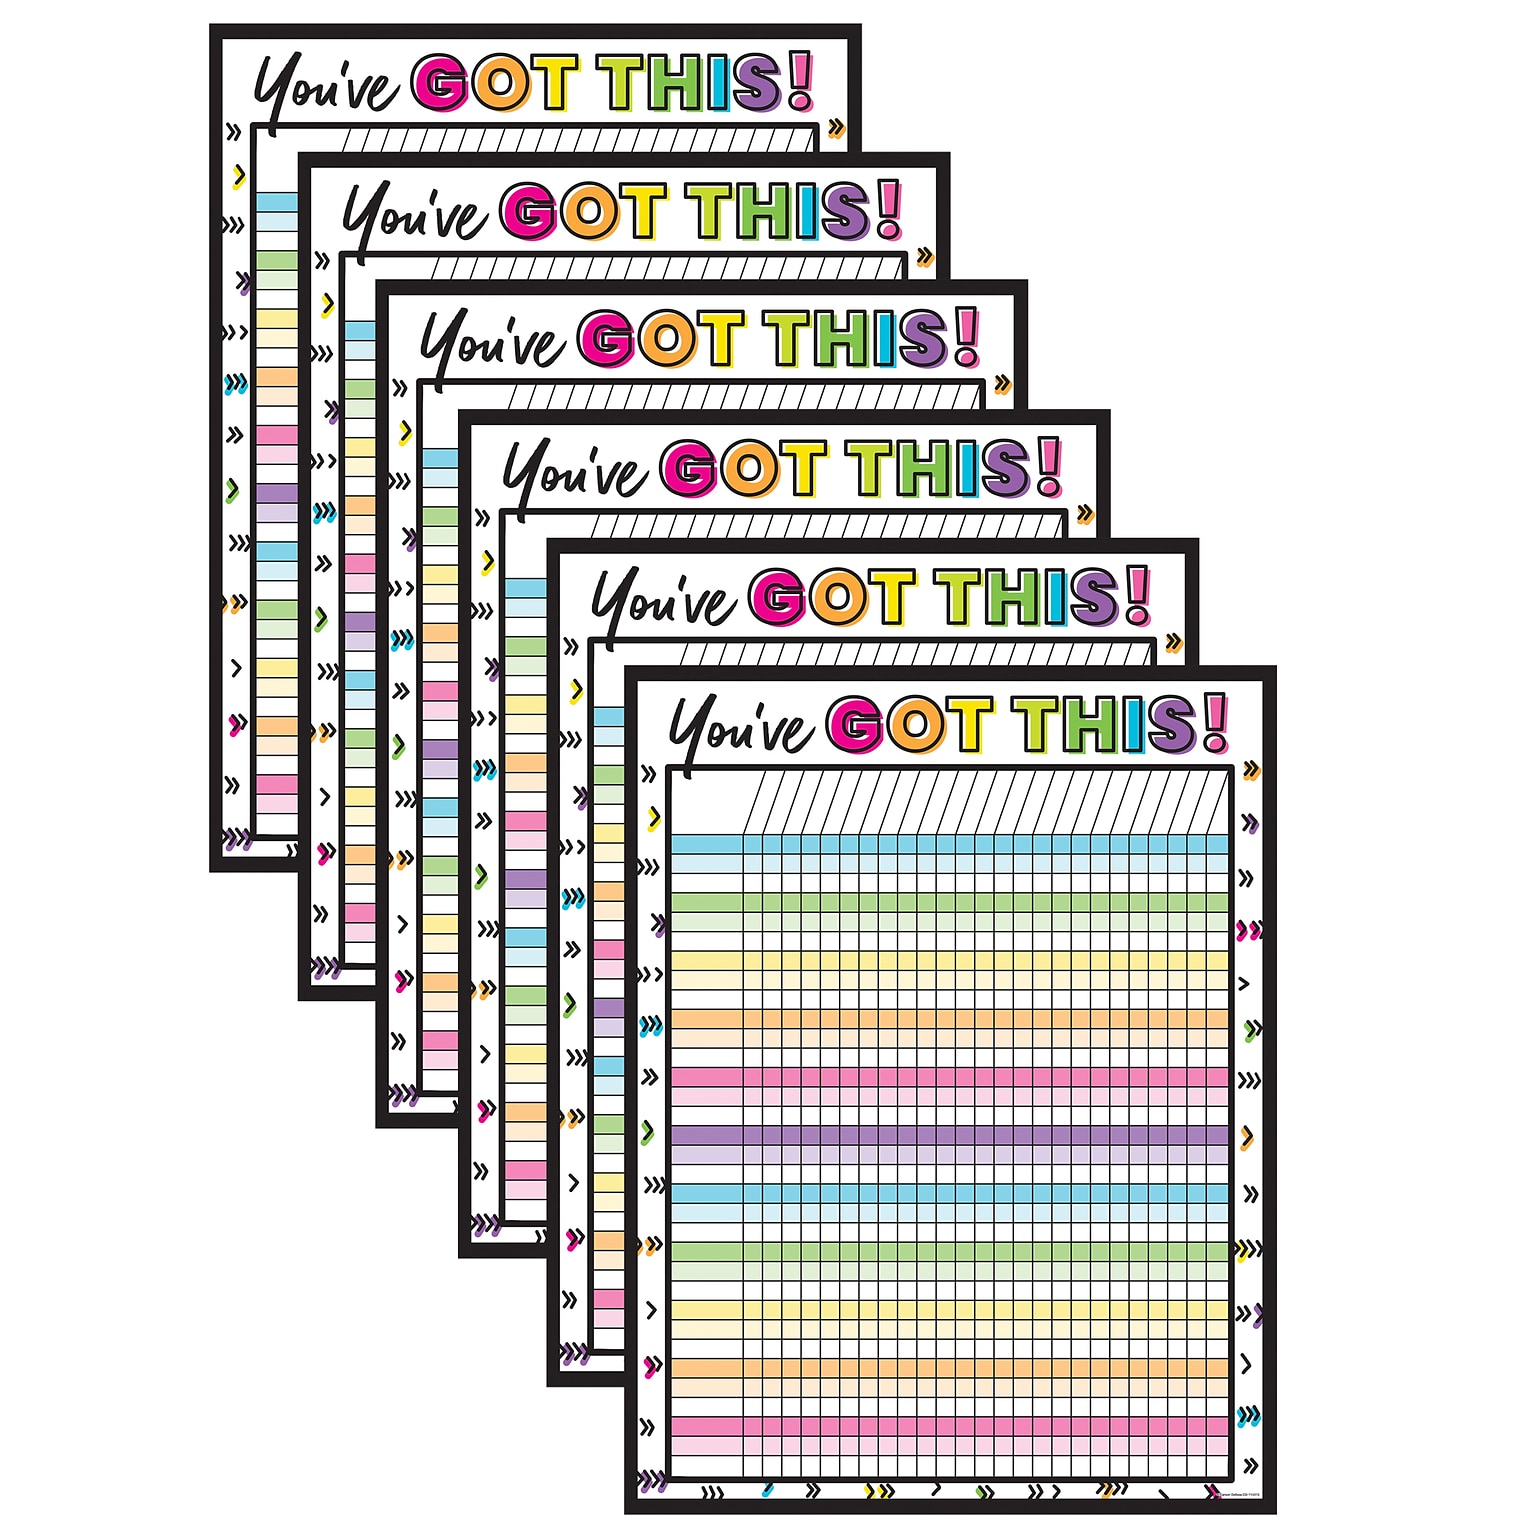 Carson Dellosa Education Kind Vibes Incentive Chart, 17 x 22, Youve Got This, Pack of 6 (CD-114313-6)